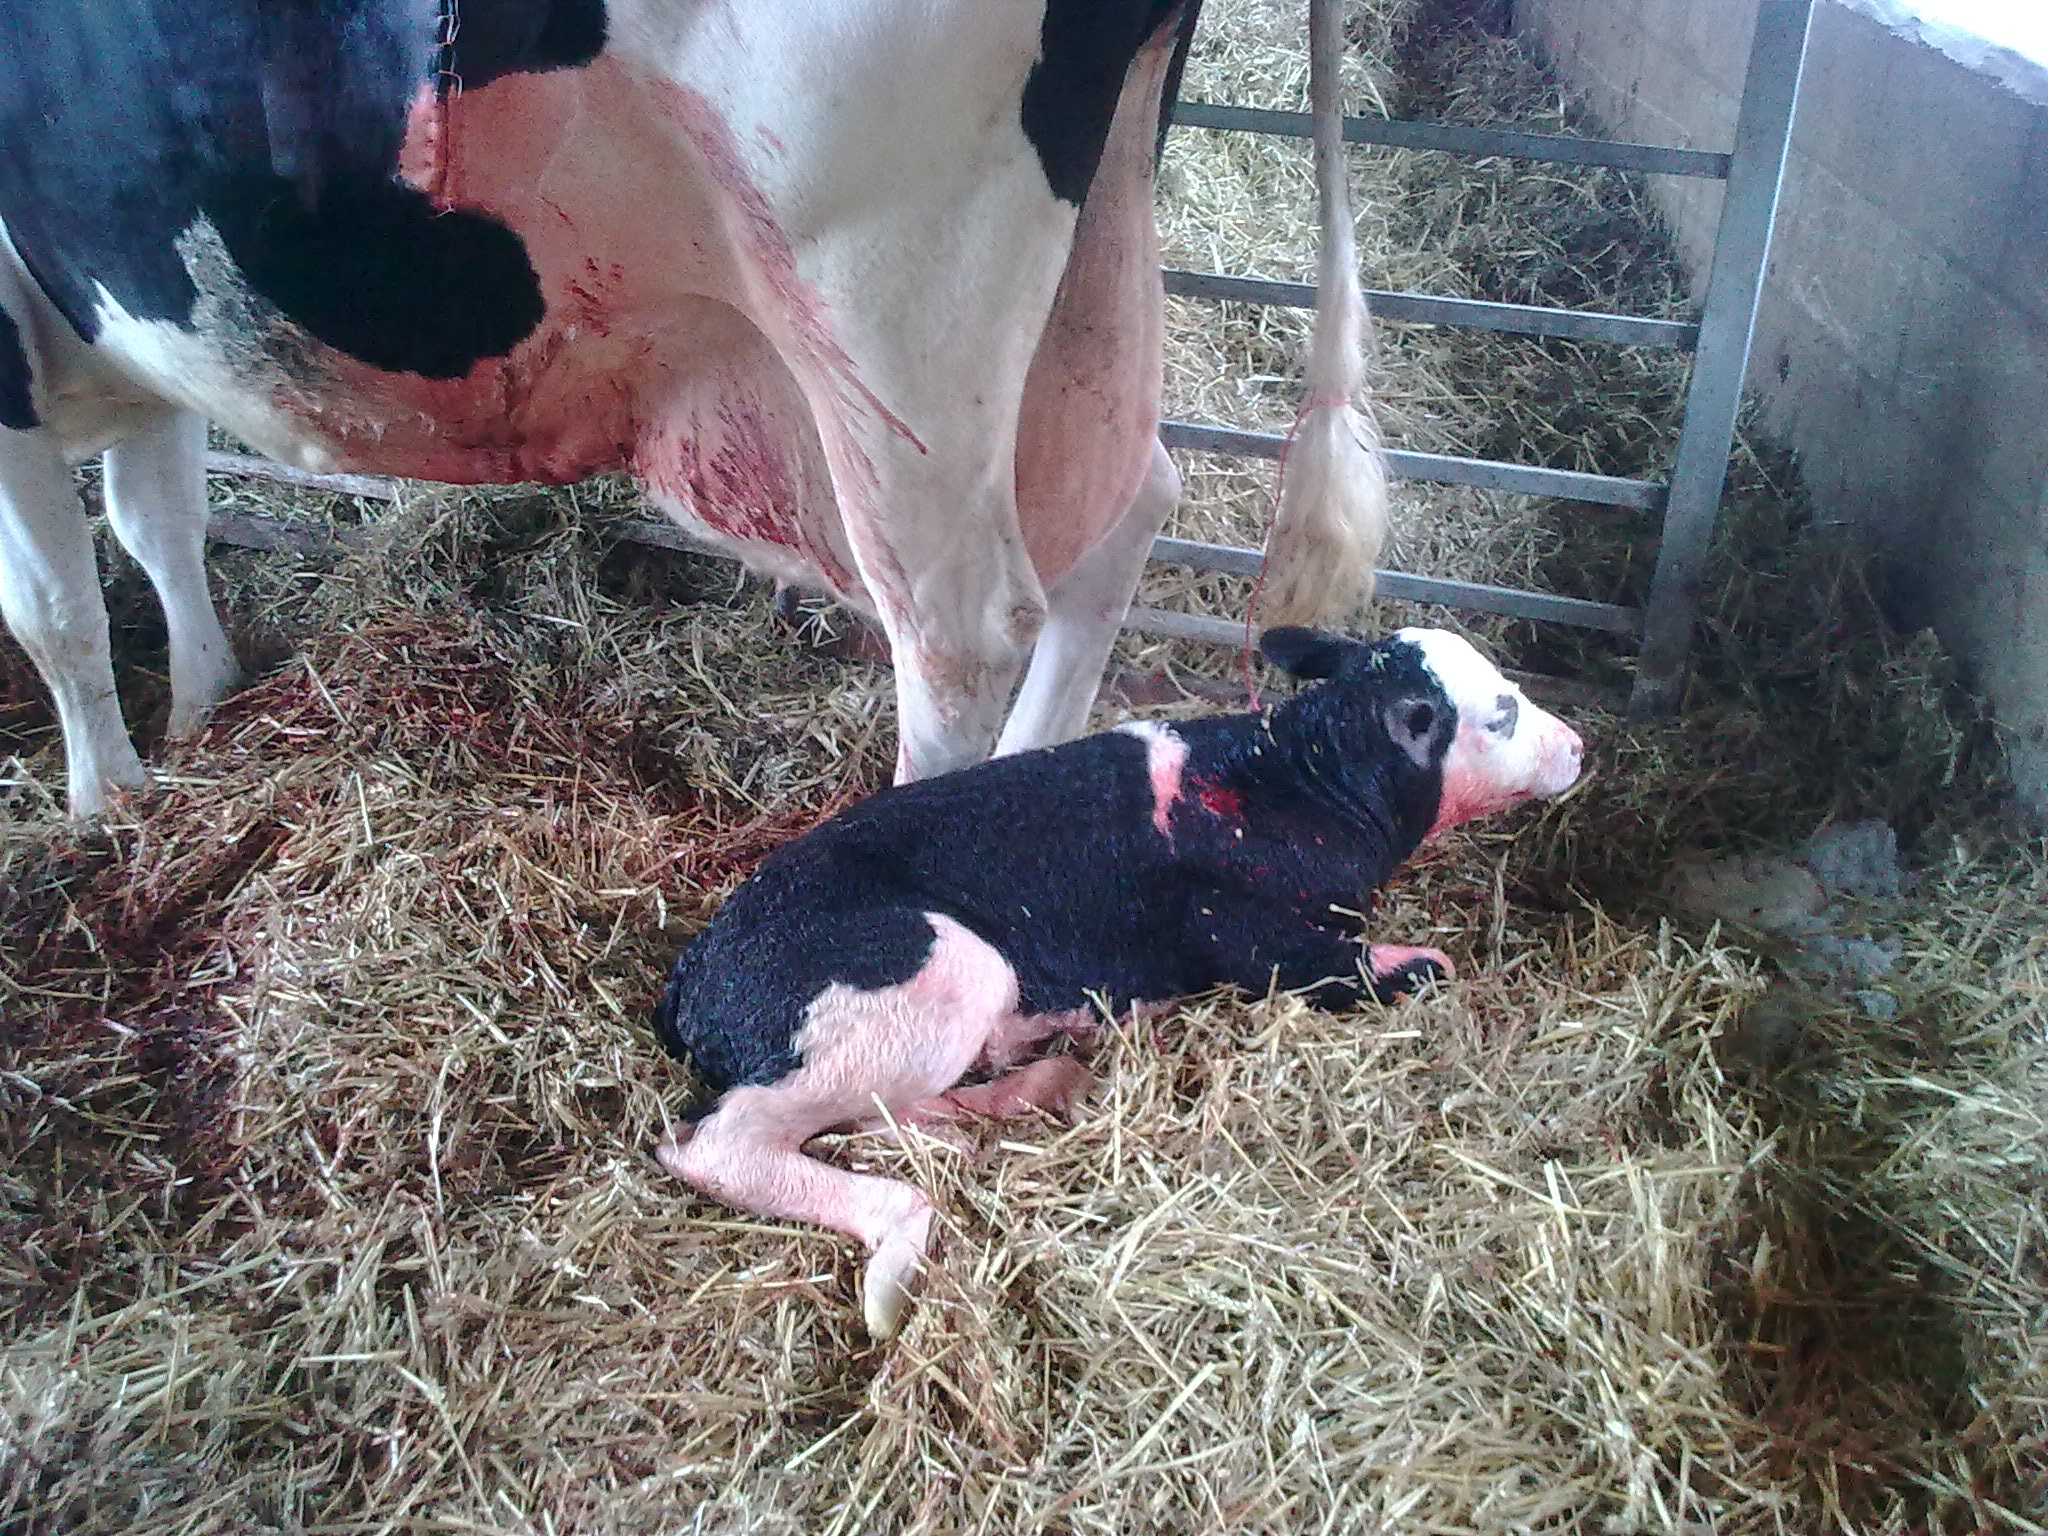 the prevention of pneumonia starts as soon as the calf is born, with the intake of colostrum